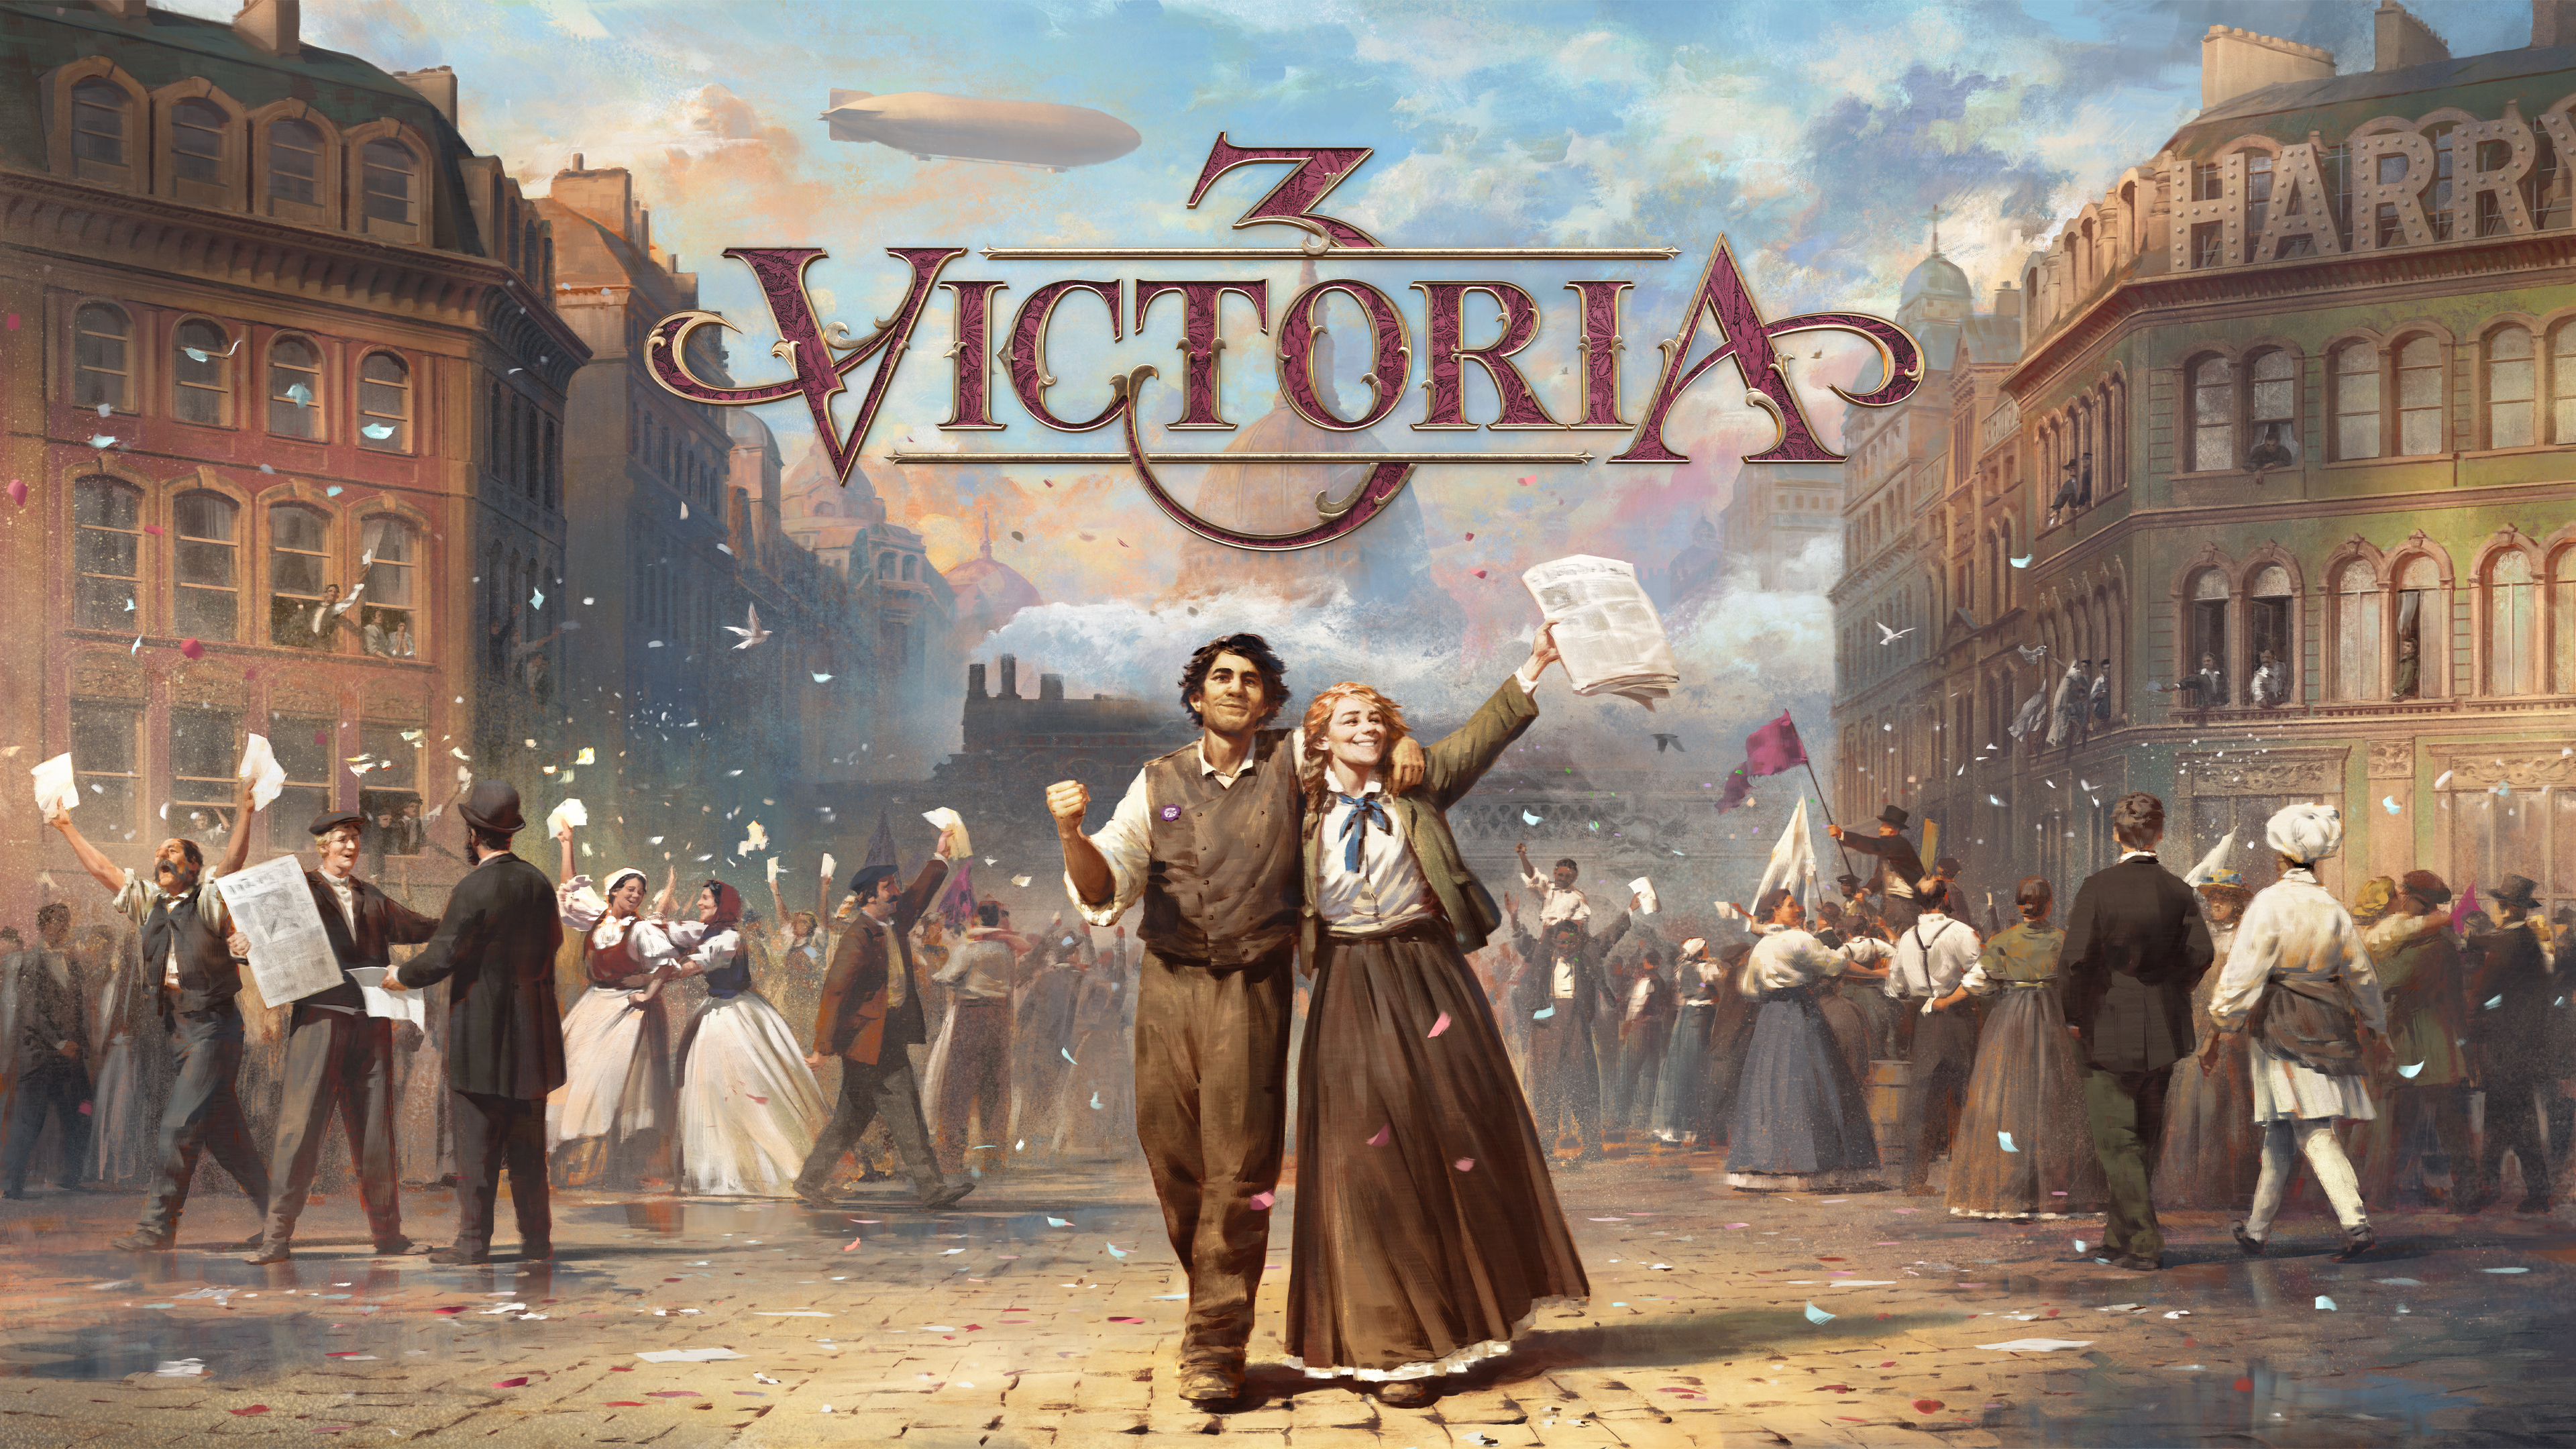 Destructoid's review of Victoria 3